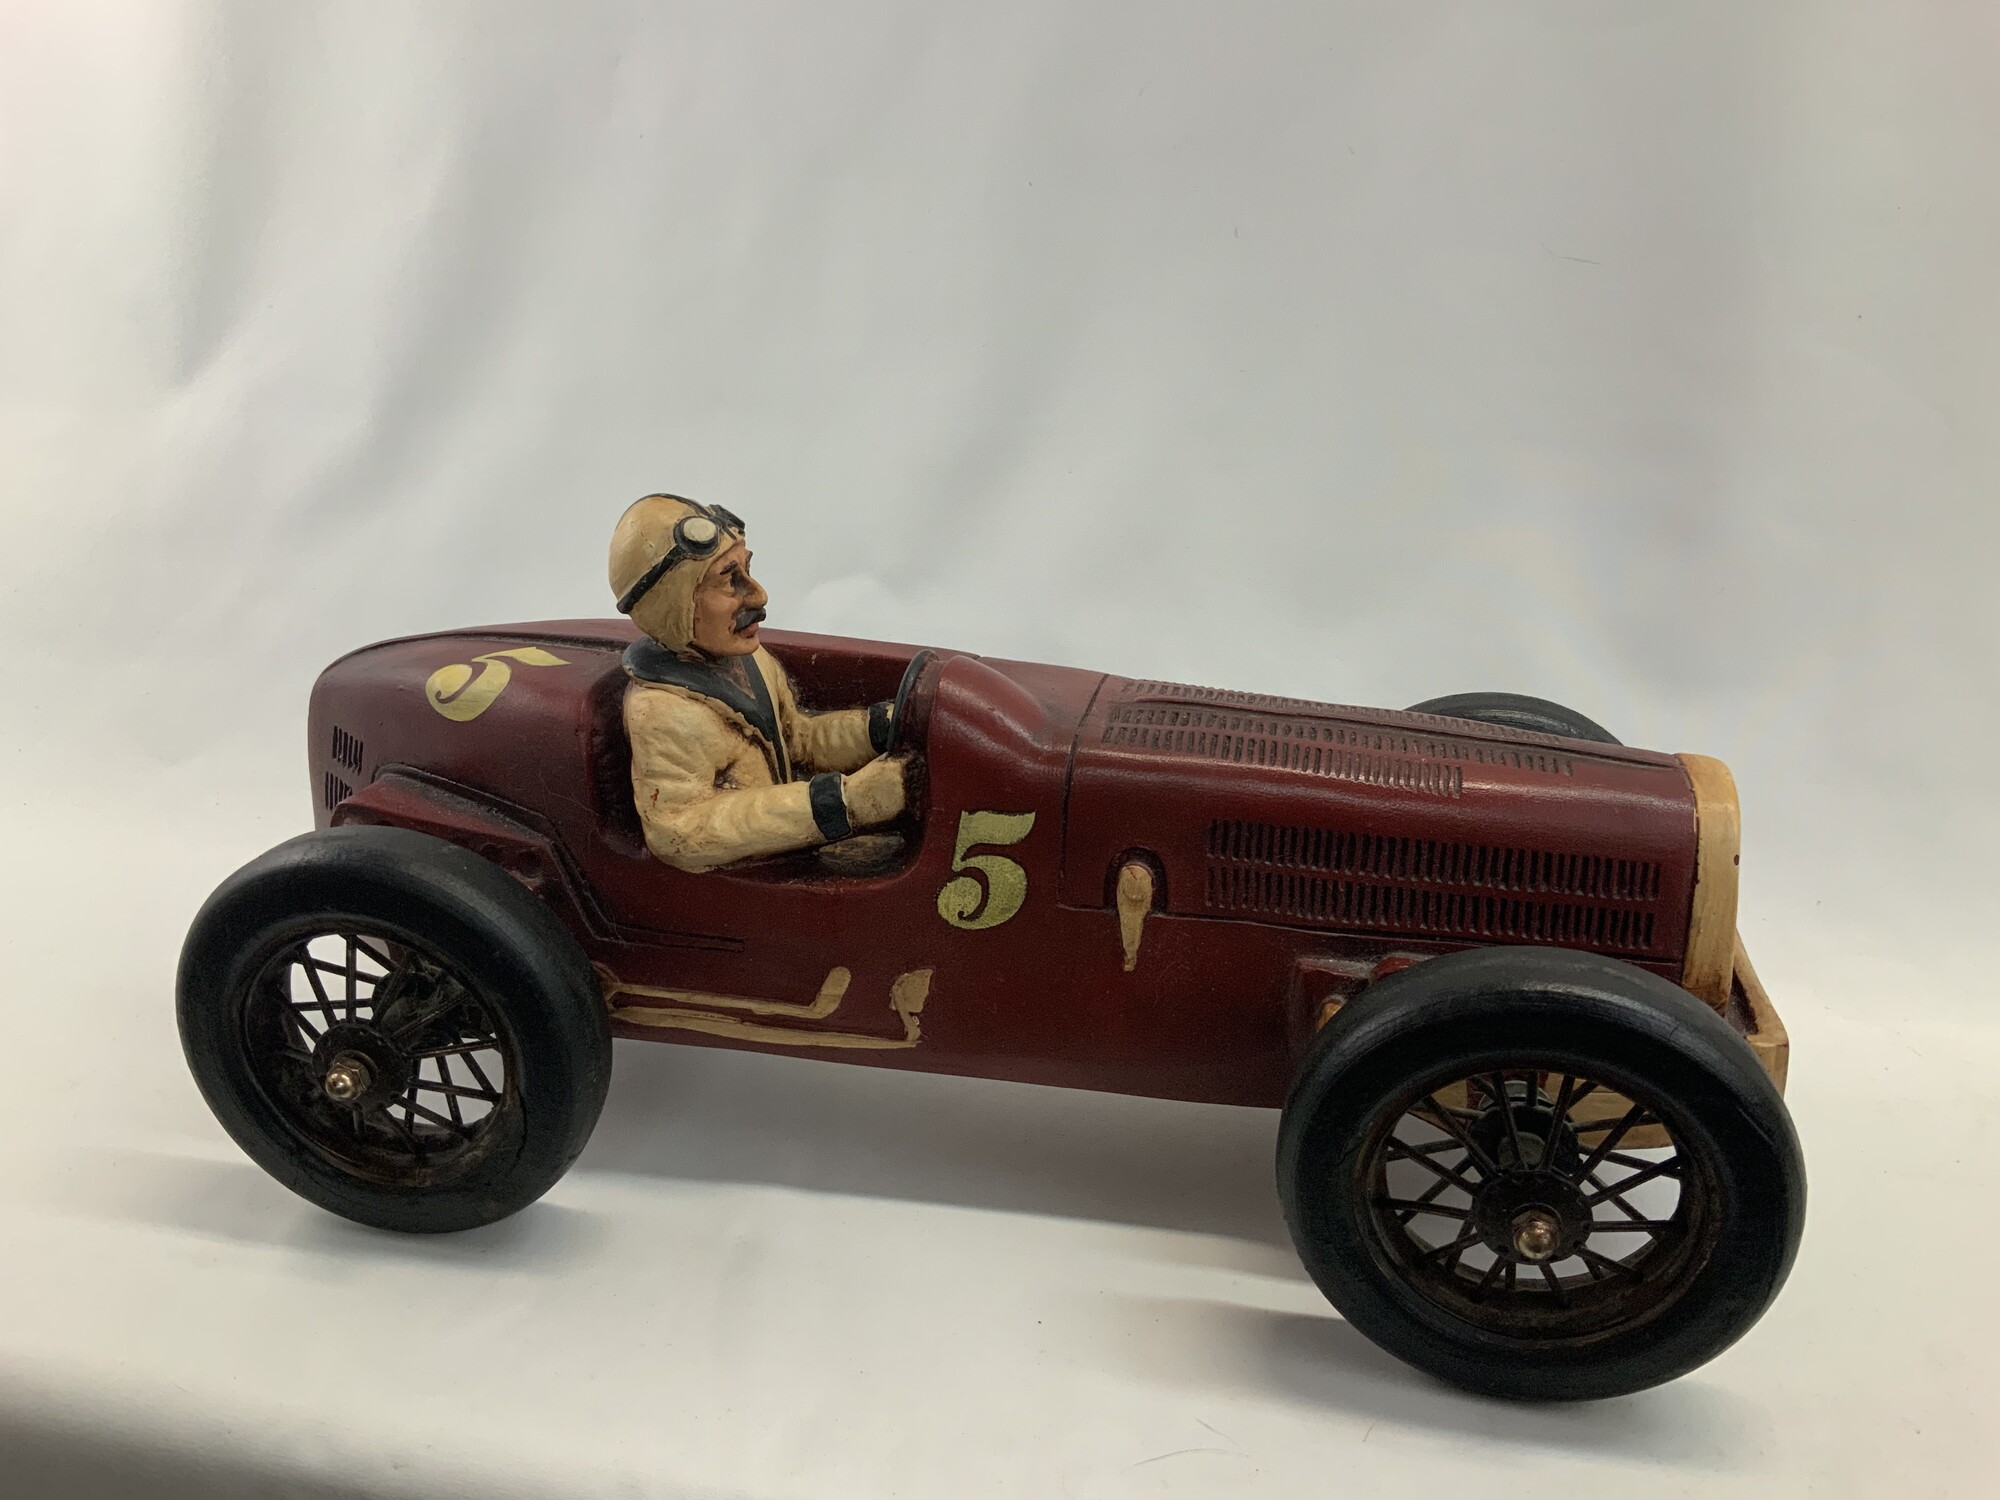 A beautiful very collectible and unique vintage classic large model sculpture race car 1920s Bugatti Type 54 Spider
Made out o f resin or plater with metal spoked rubber wheels complete with driver
20 inches long 10 inches high 10 inches wide Very good condition
A similar model was featured on the TV Show Friends